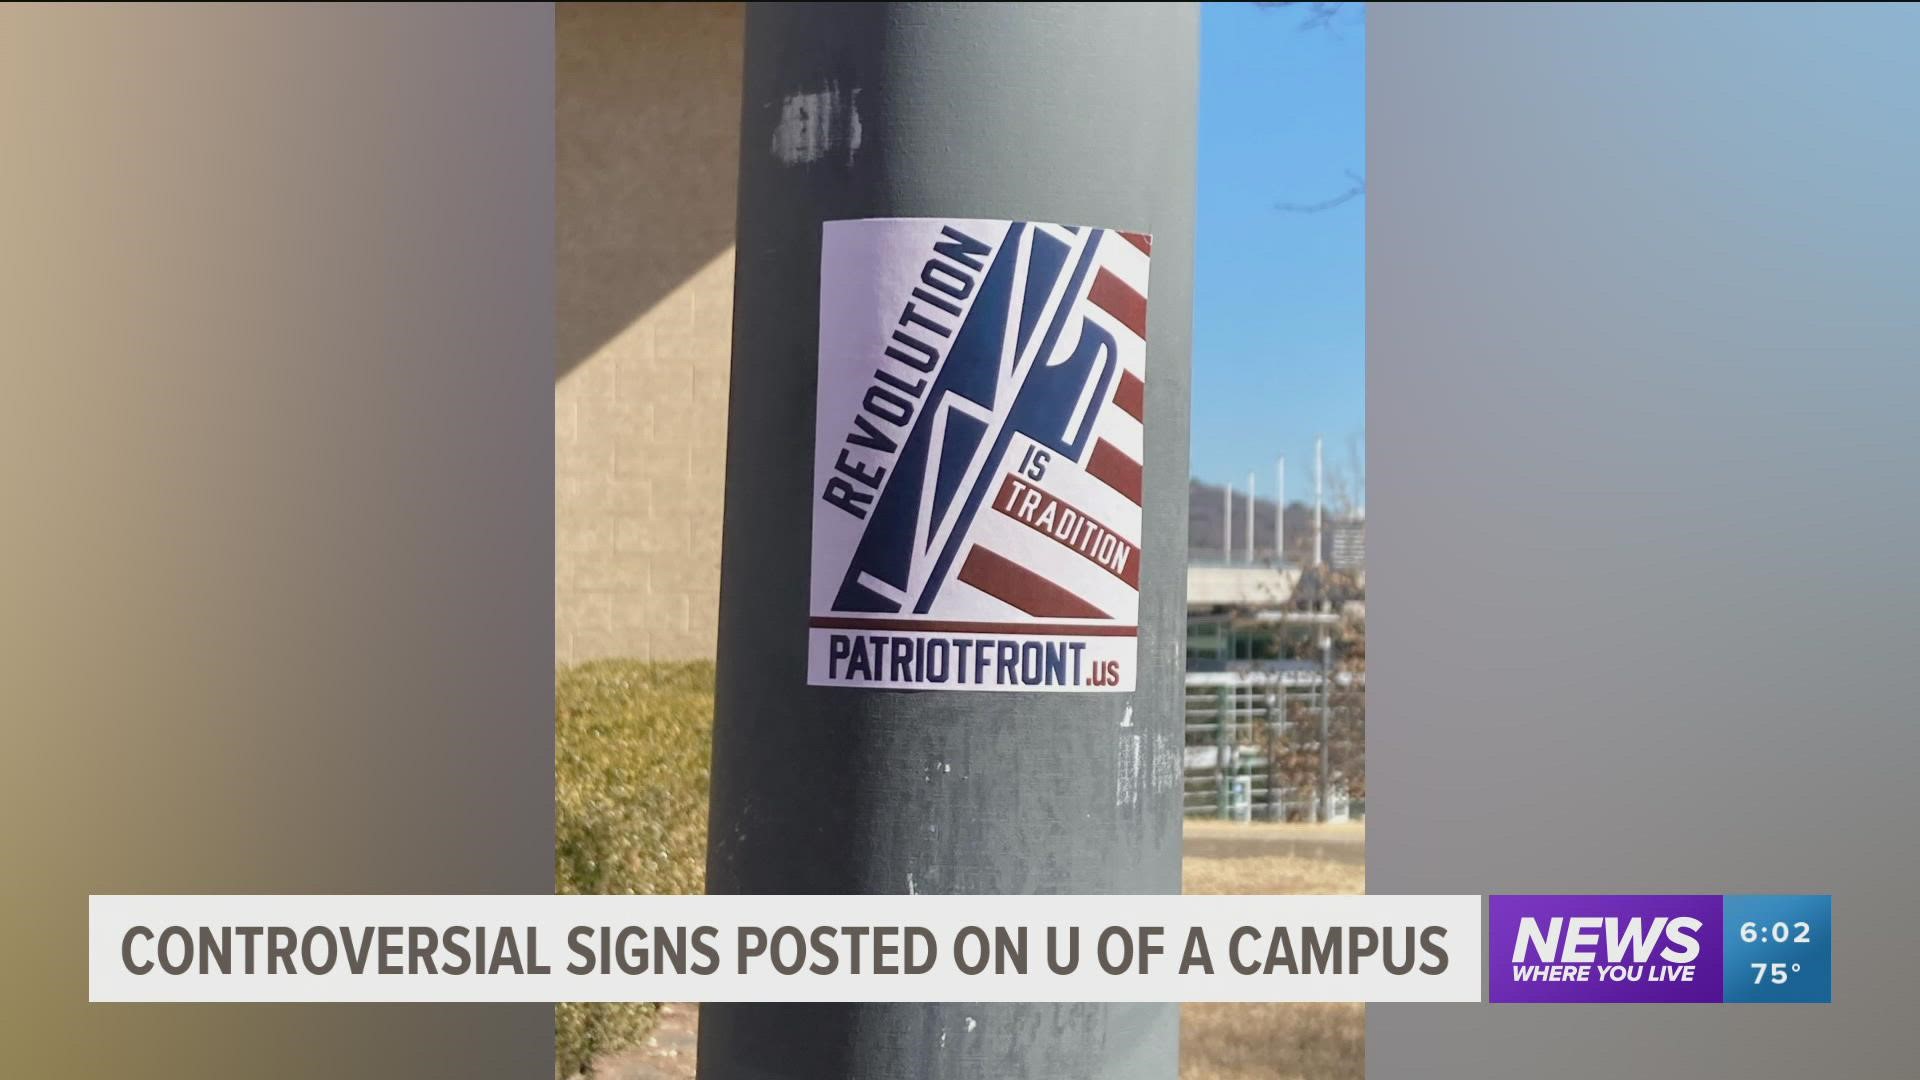 University of Arkansas students are concerned after posters were put up around campus that links to a white supremacist group website.